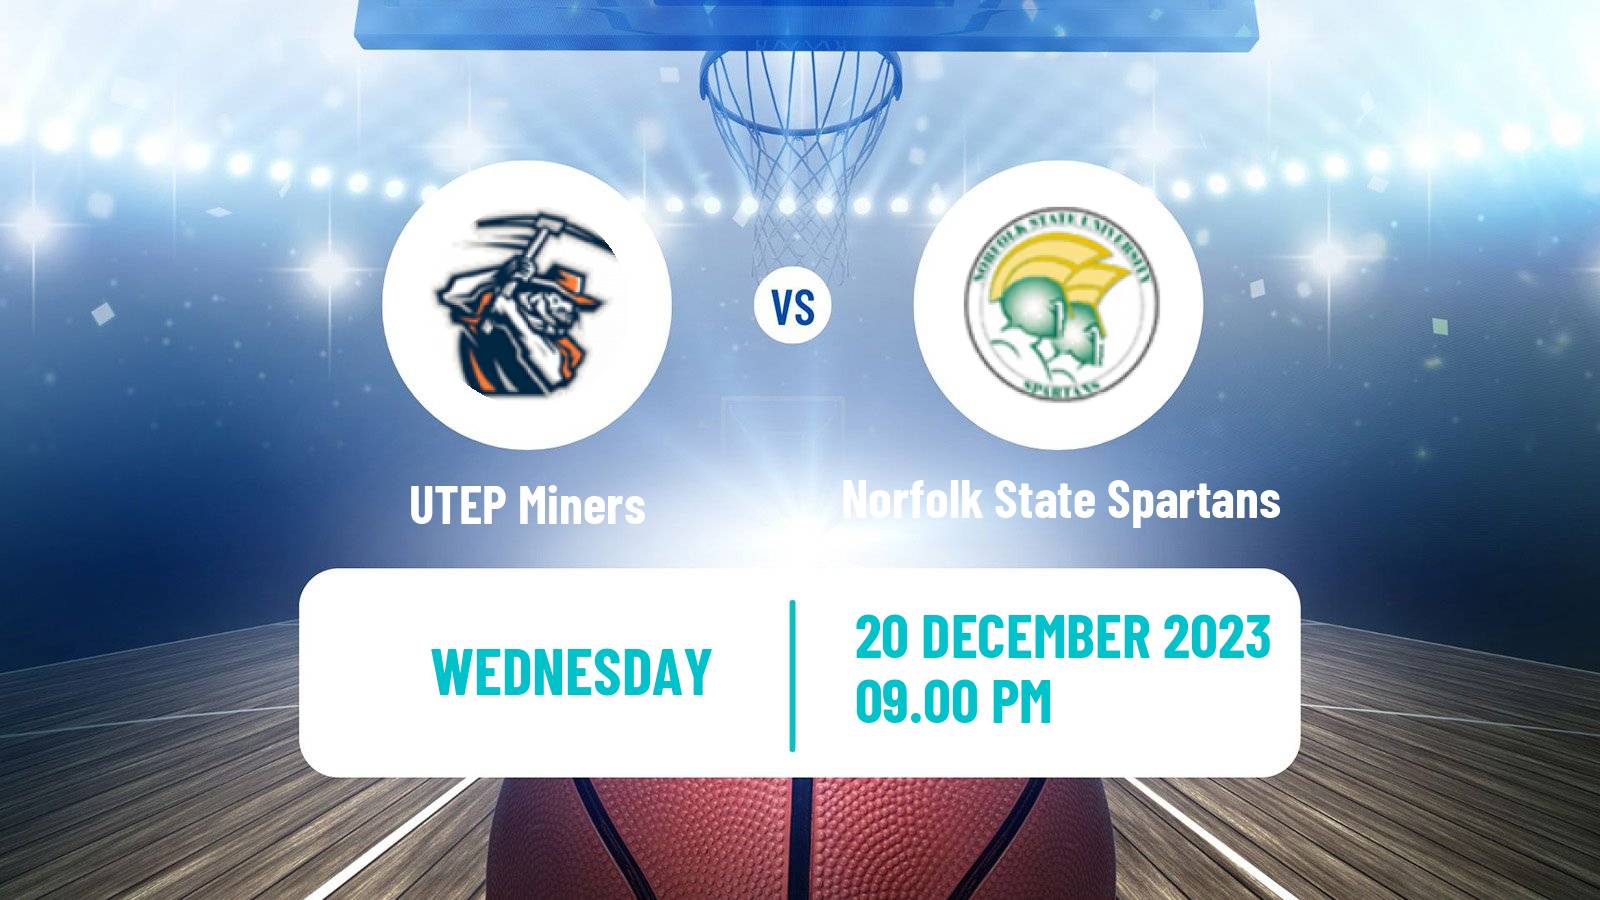 Basketball NCAA College Basketball UTEP Miners - Norfolk State Spartans